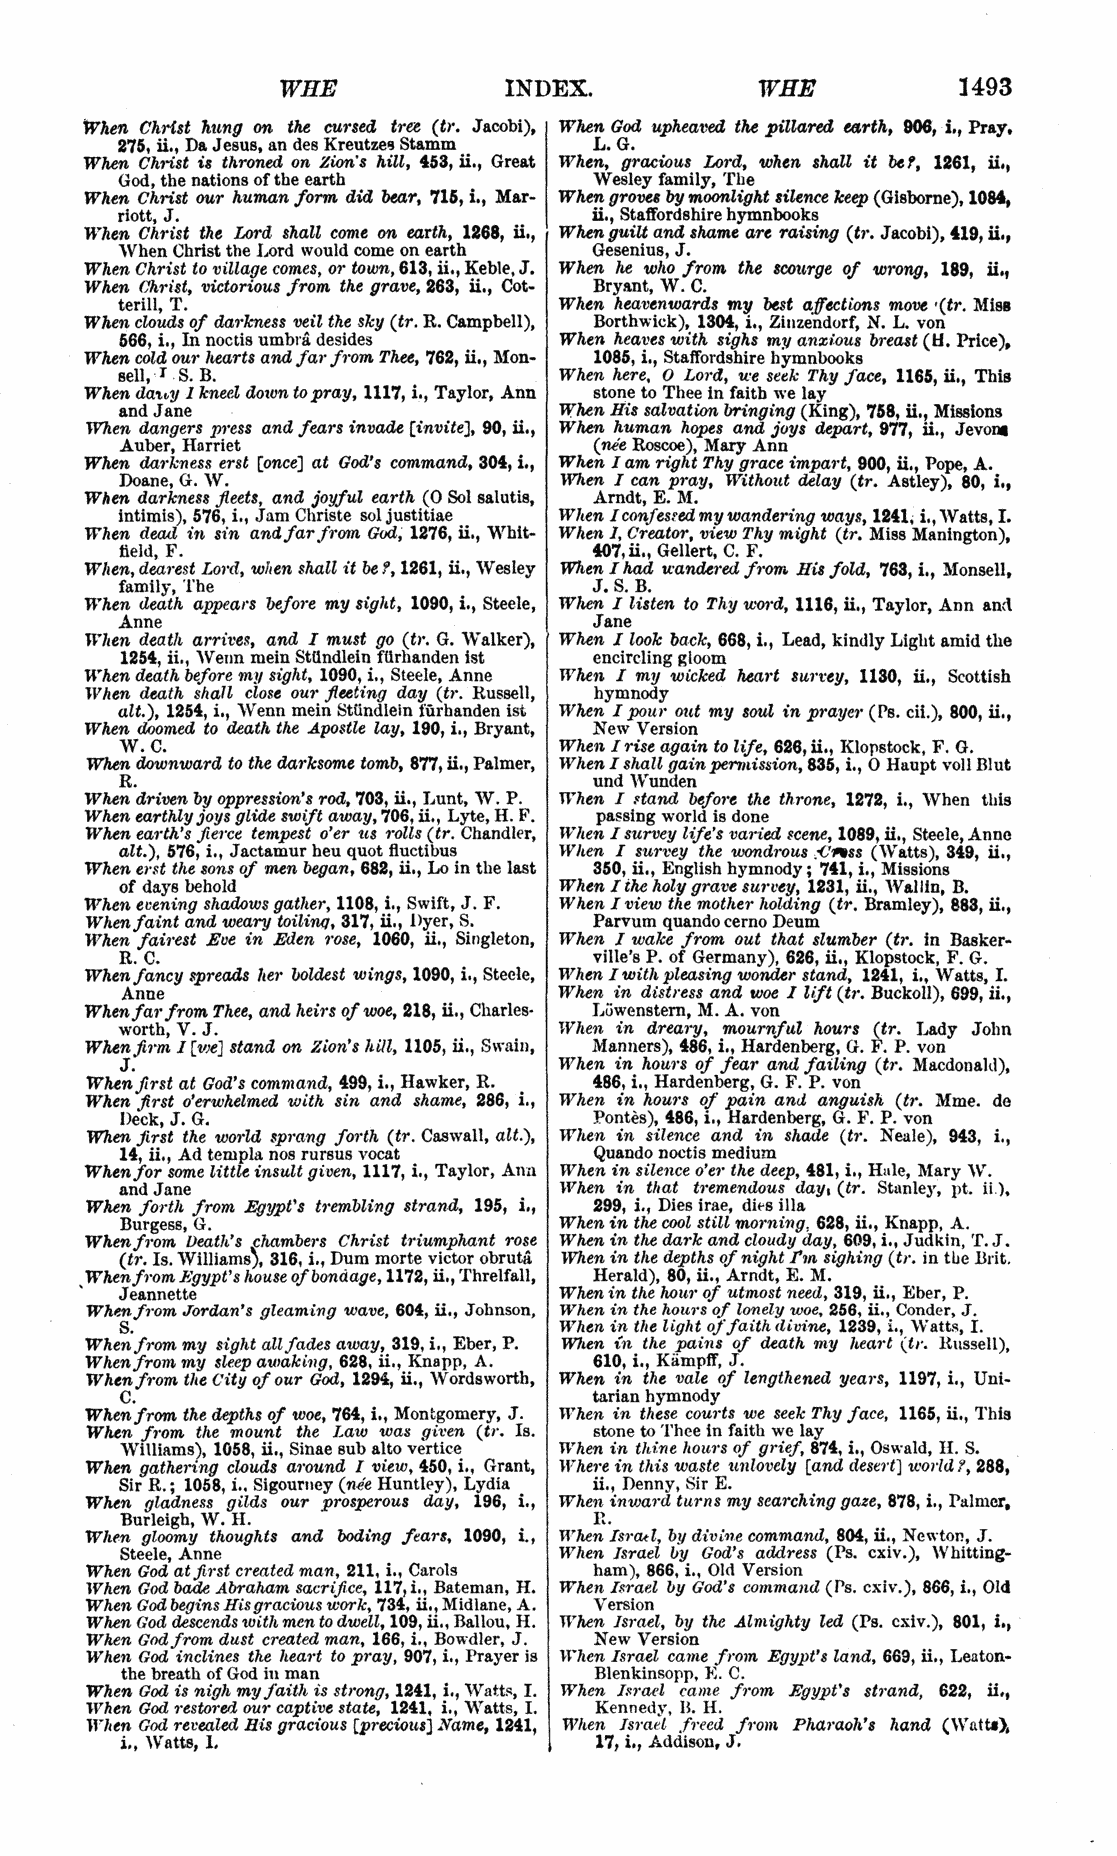 Image of page 1493